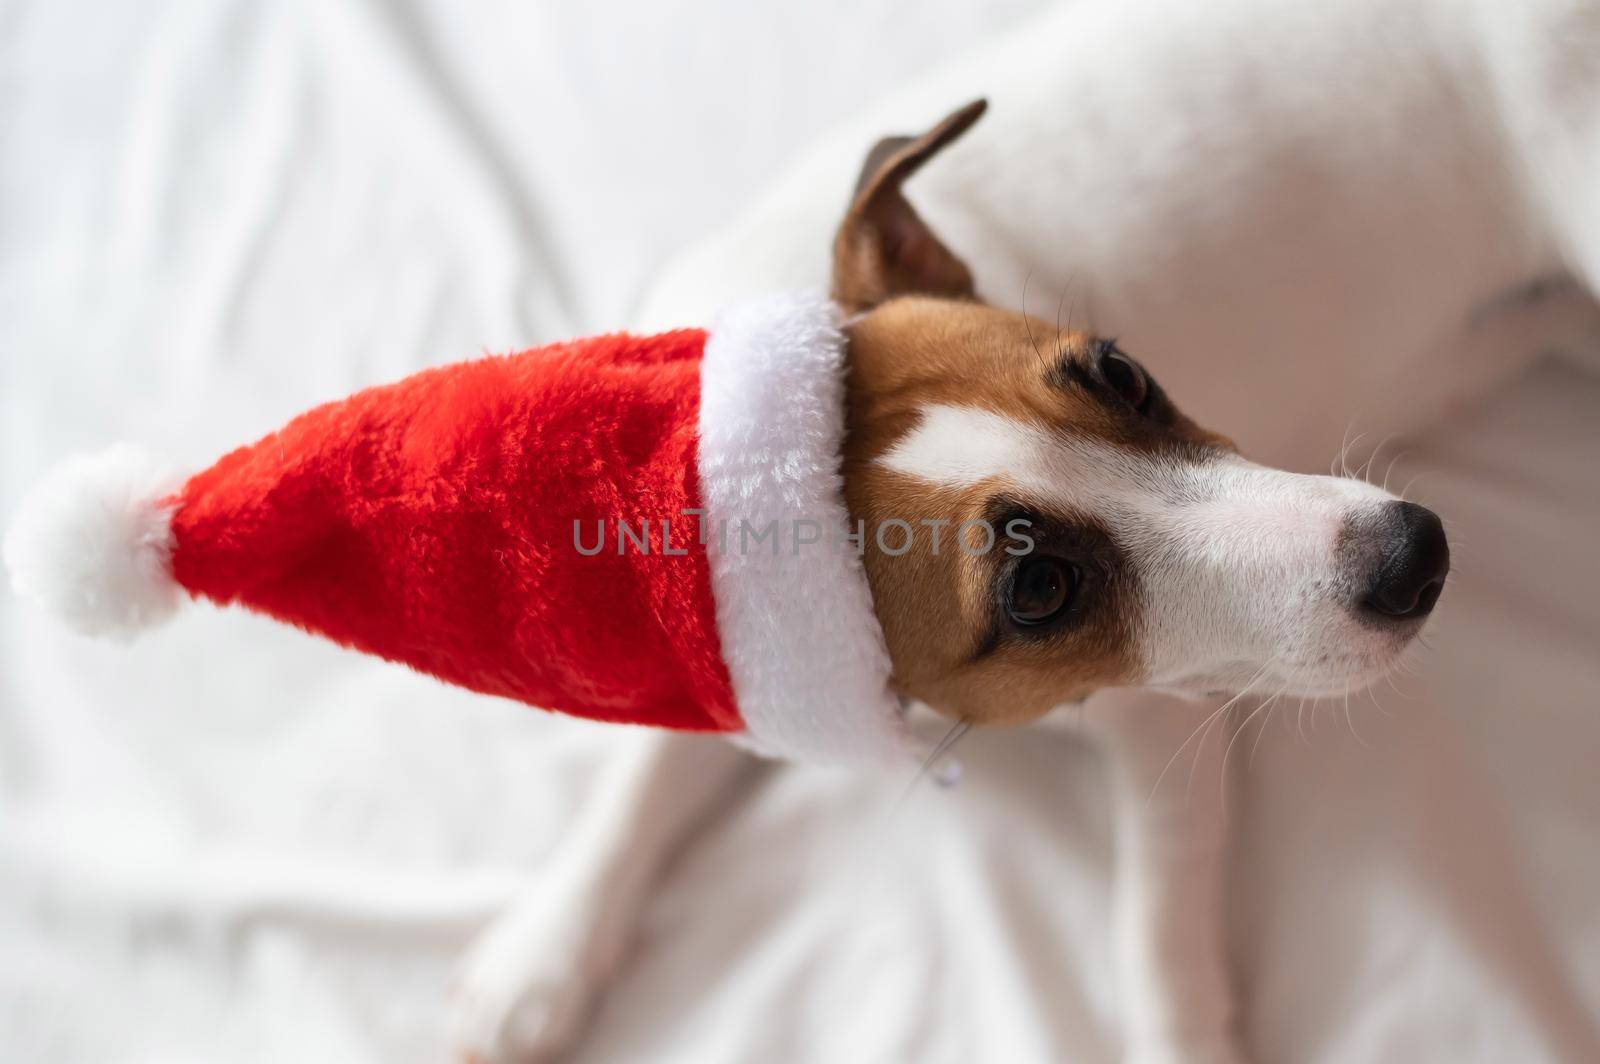 Jack russell terrier dog in santa claus hat lies on a white sheet. Christmas greeting card by mrwed54